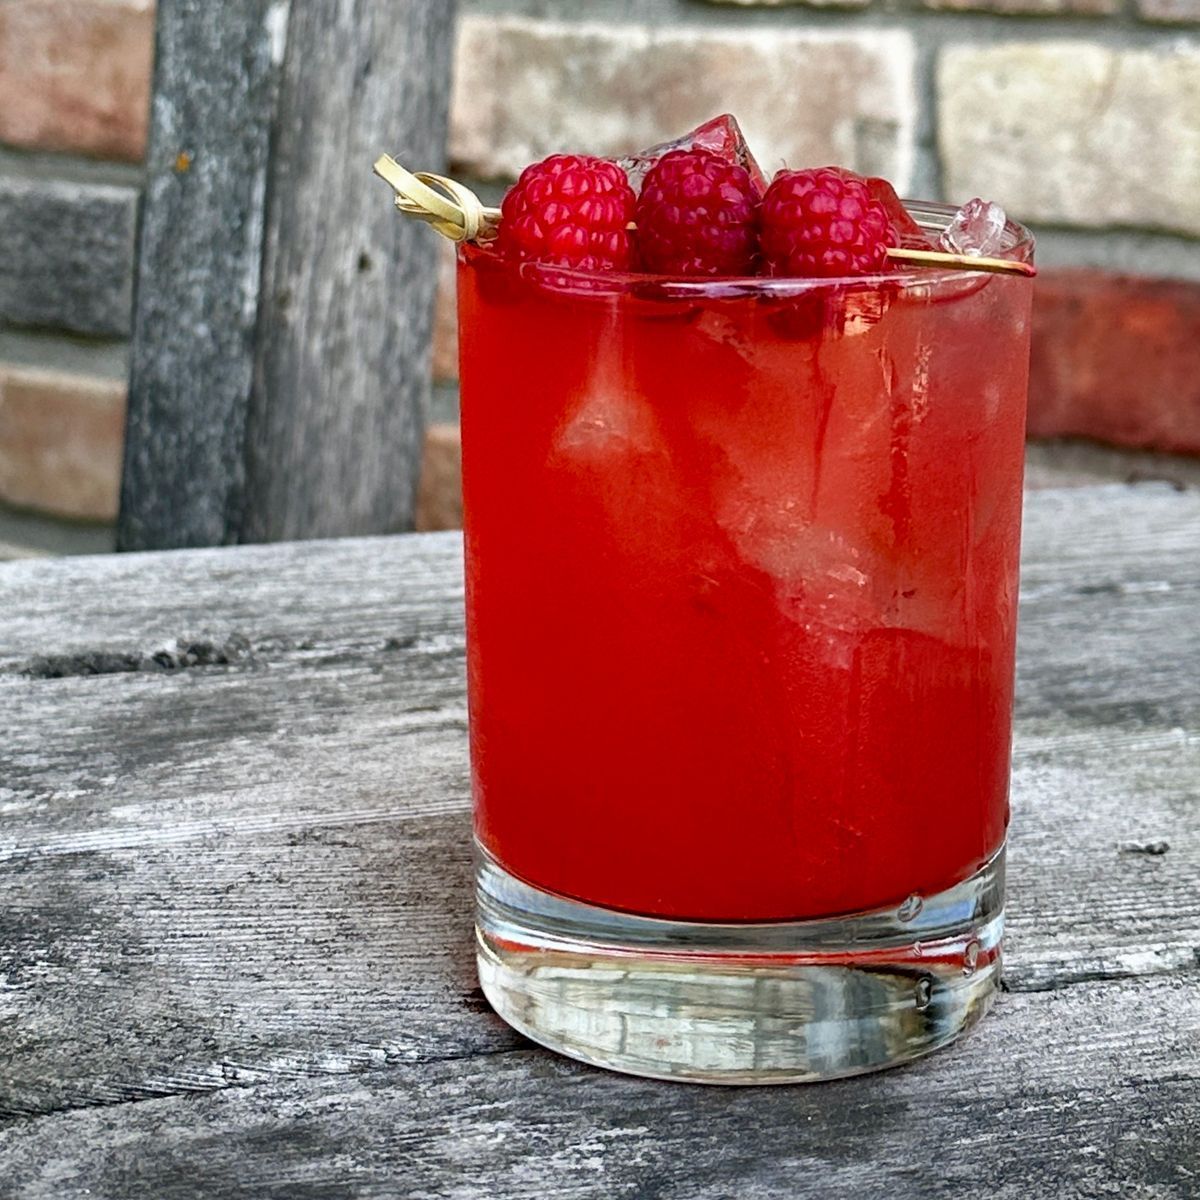 This is a classic rum and raspberry cocktail created in the 1800s in New York City. A great drink to enjoy during the hot summer to cool down. Make your own raspberry syrup or toss some fresh berries in your cocktail shaker with simple syrup. 